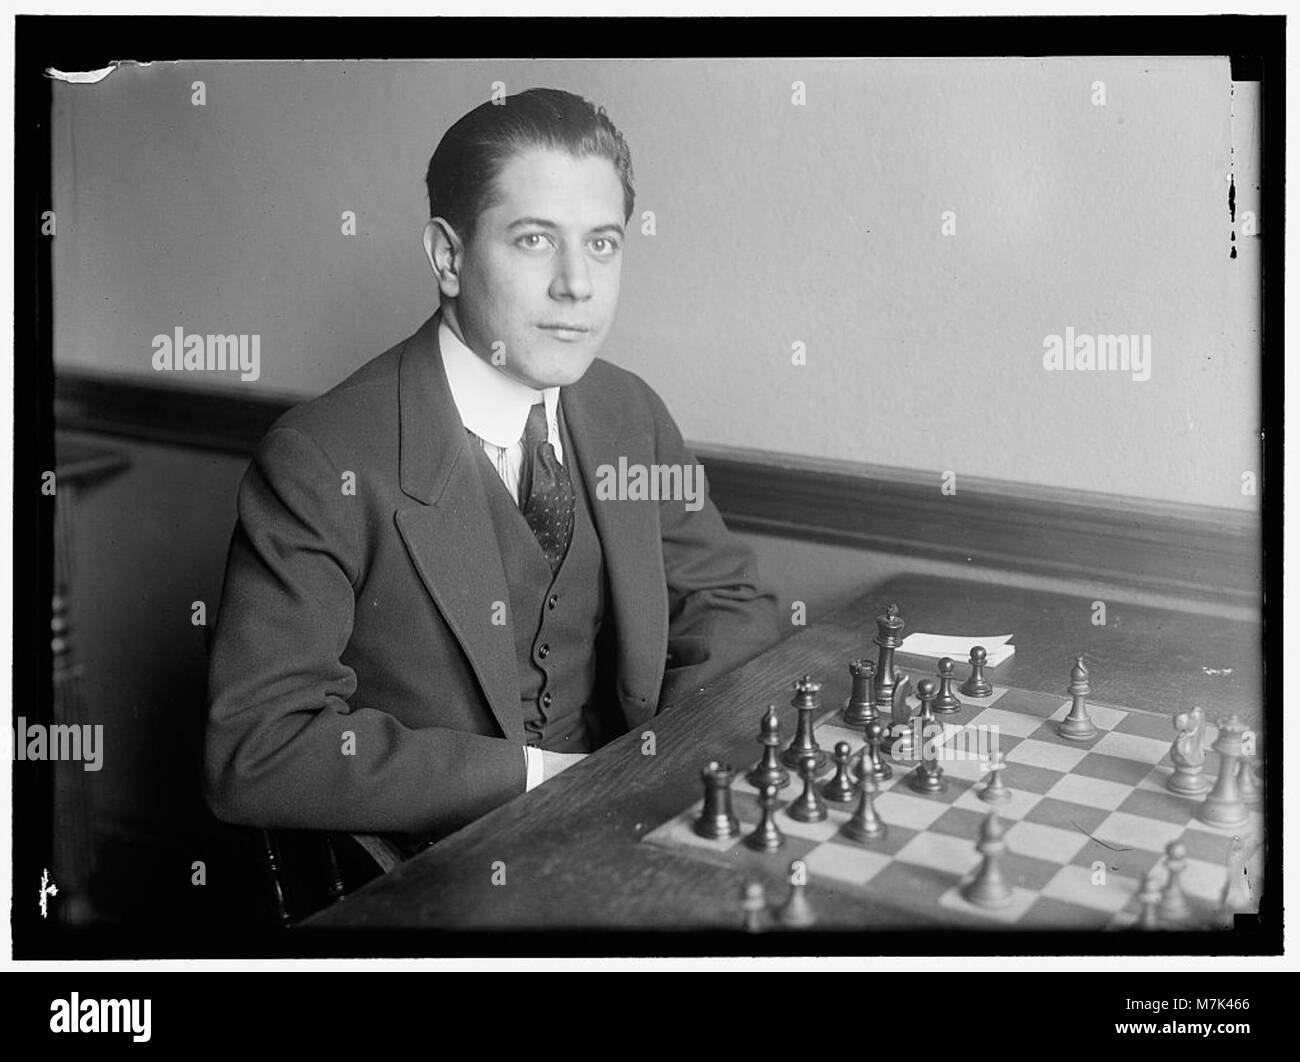 The Parallel Lives of A. Alekhine & J.R. Capablanca